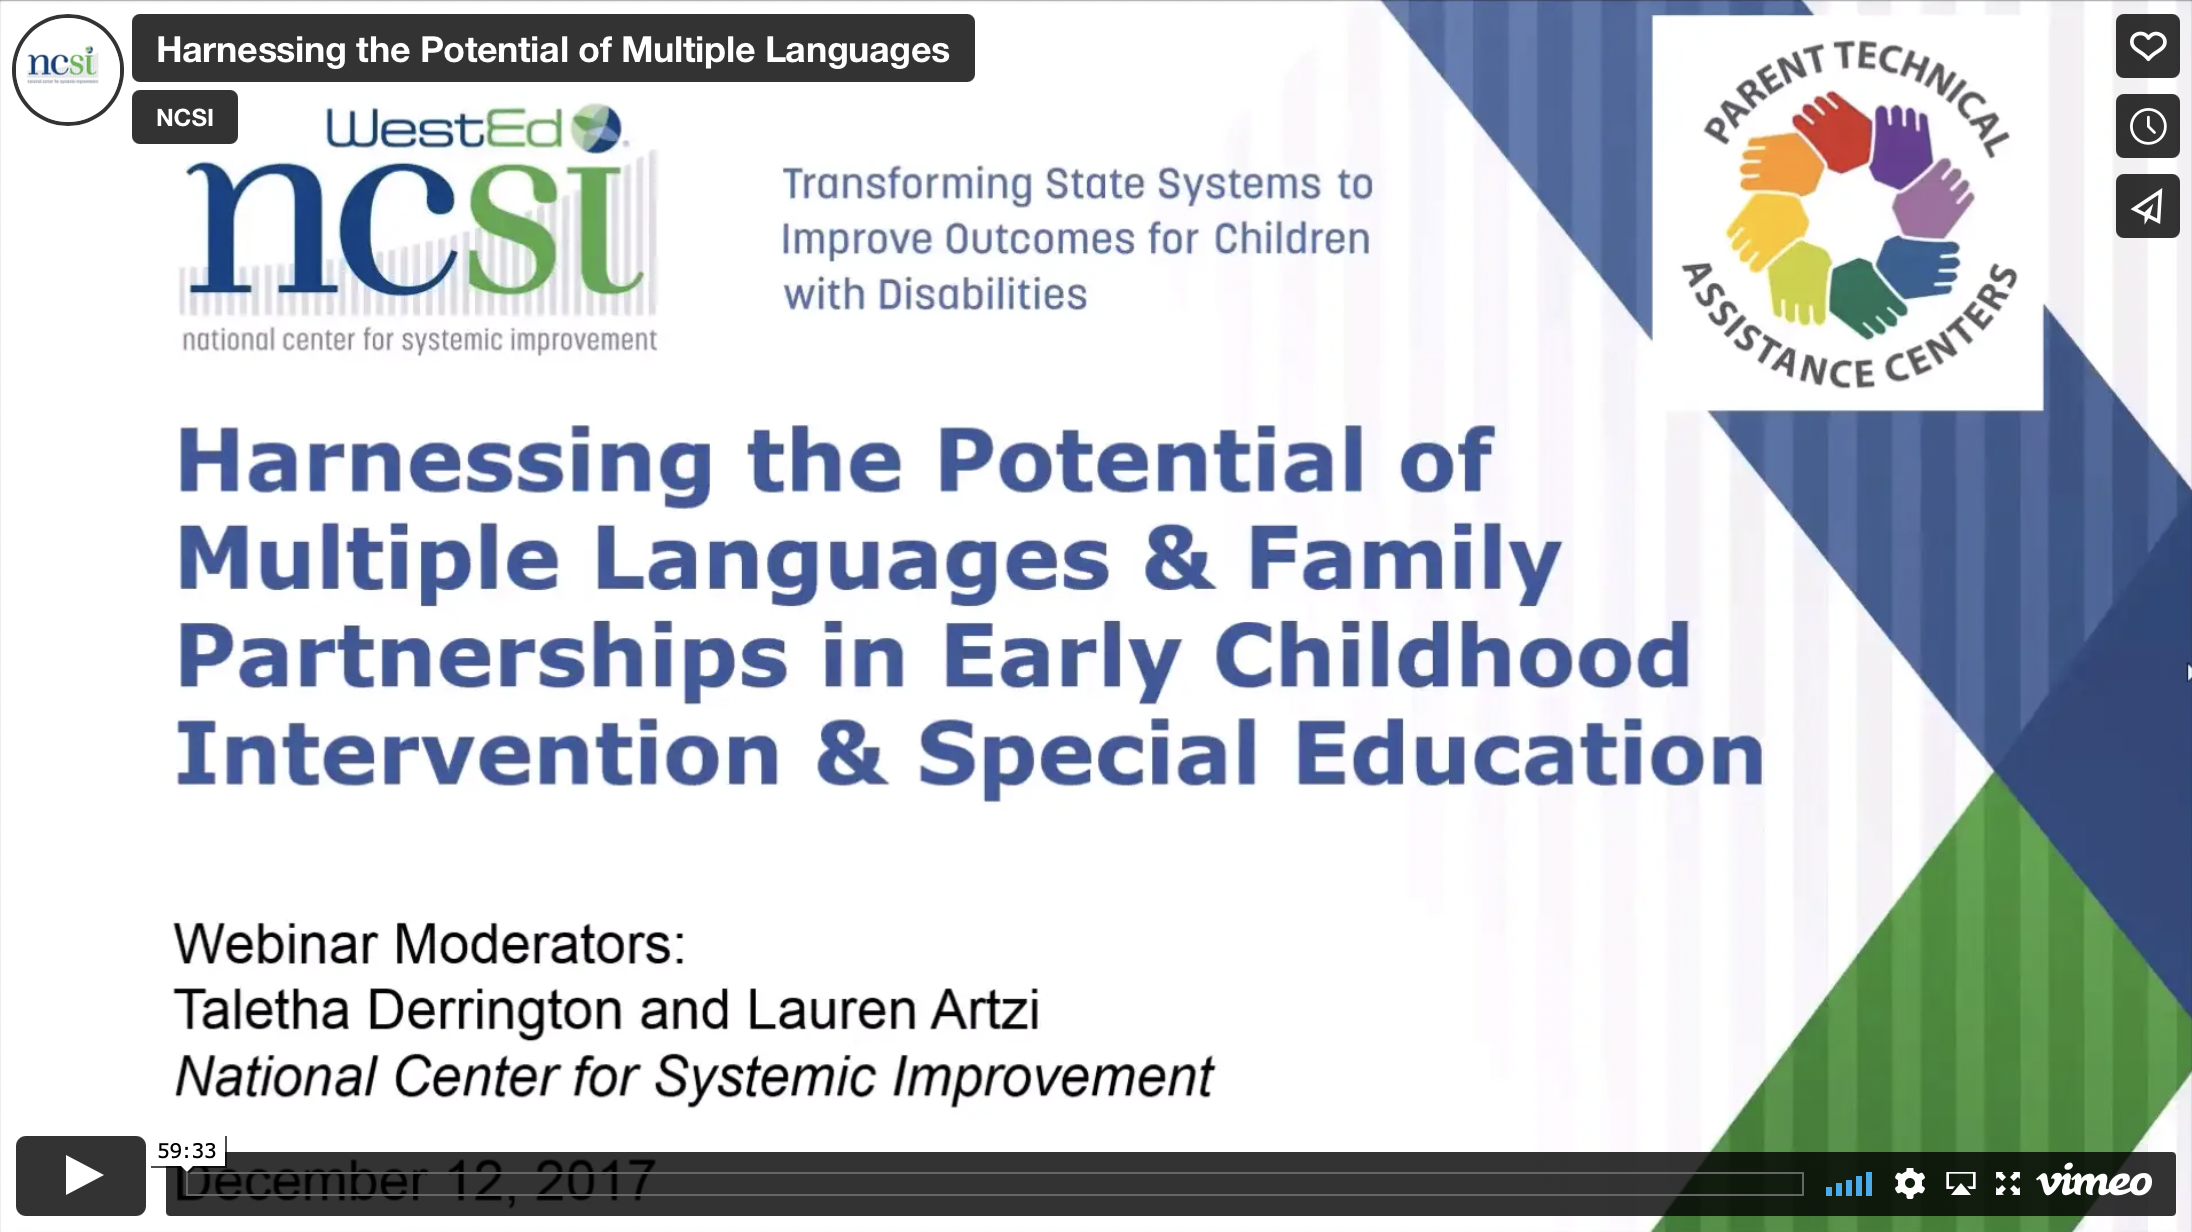 Harnessing the Potential of Multiple Languages & Family Partnerships in Early Childhood Intervention & Special Education